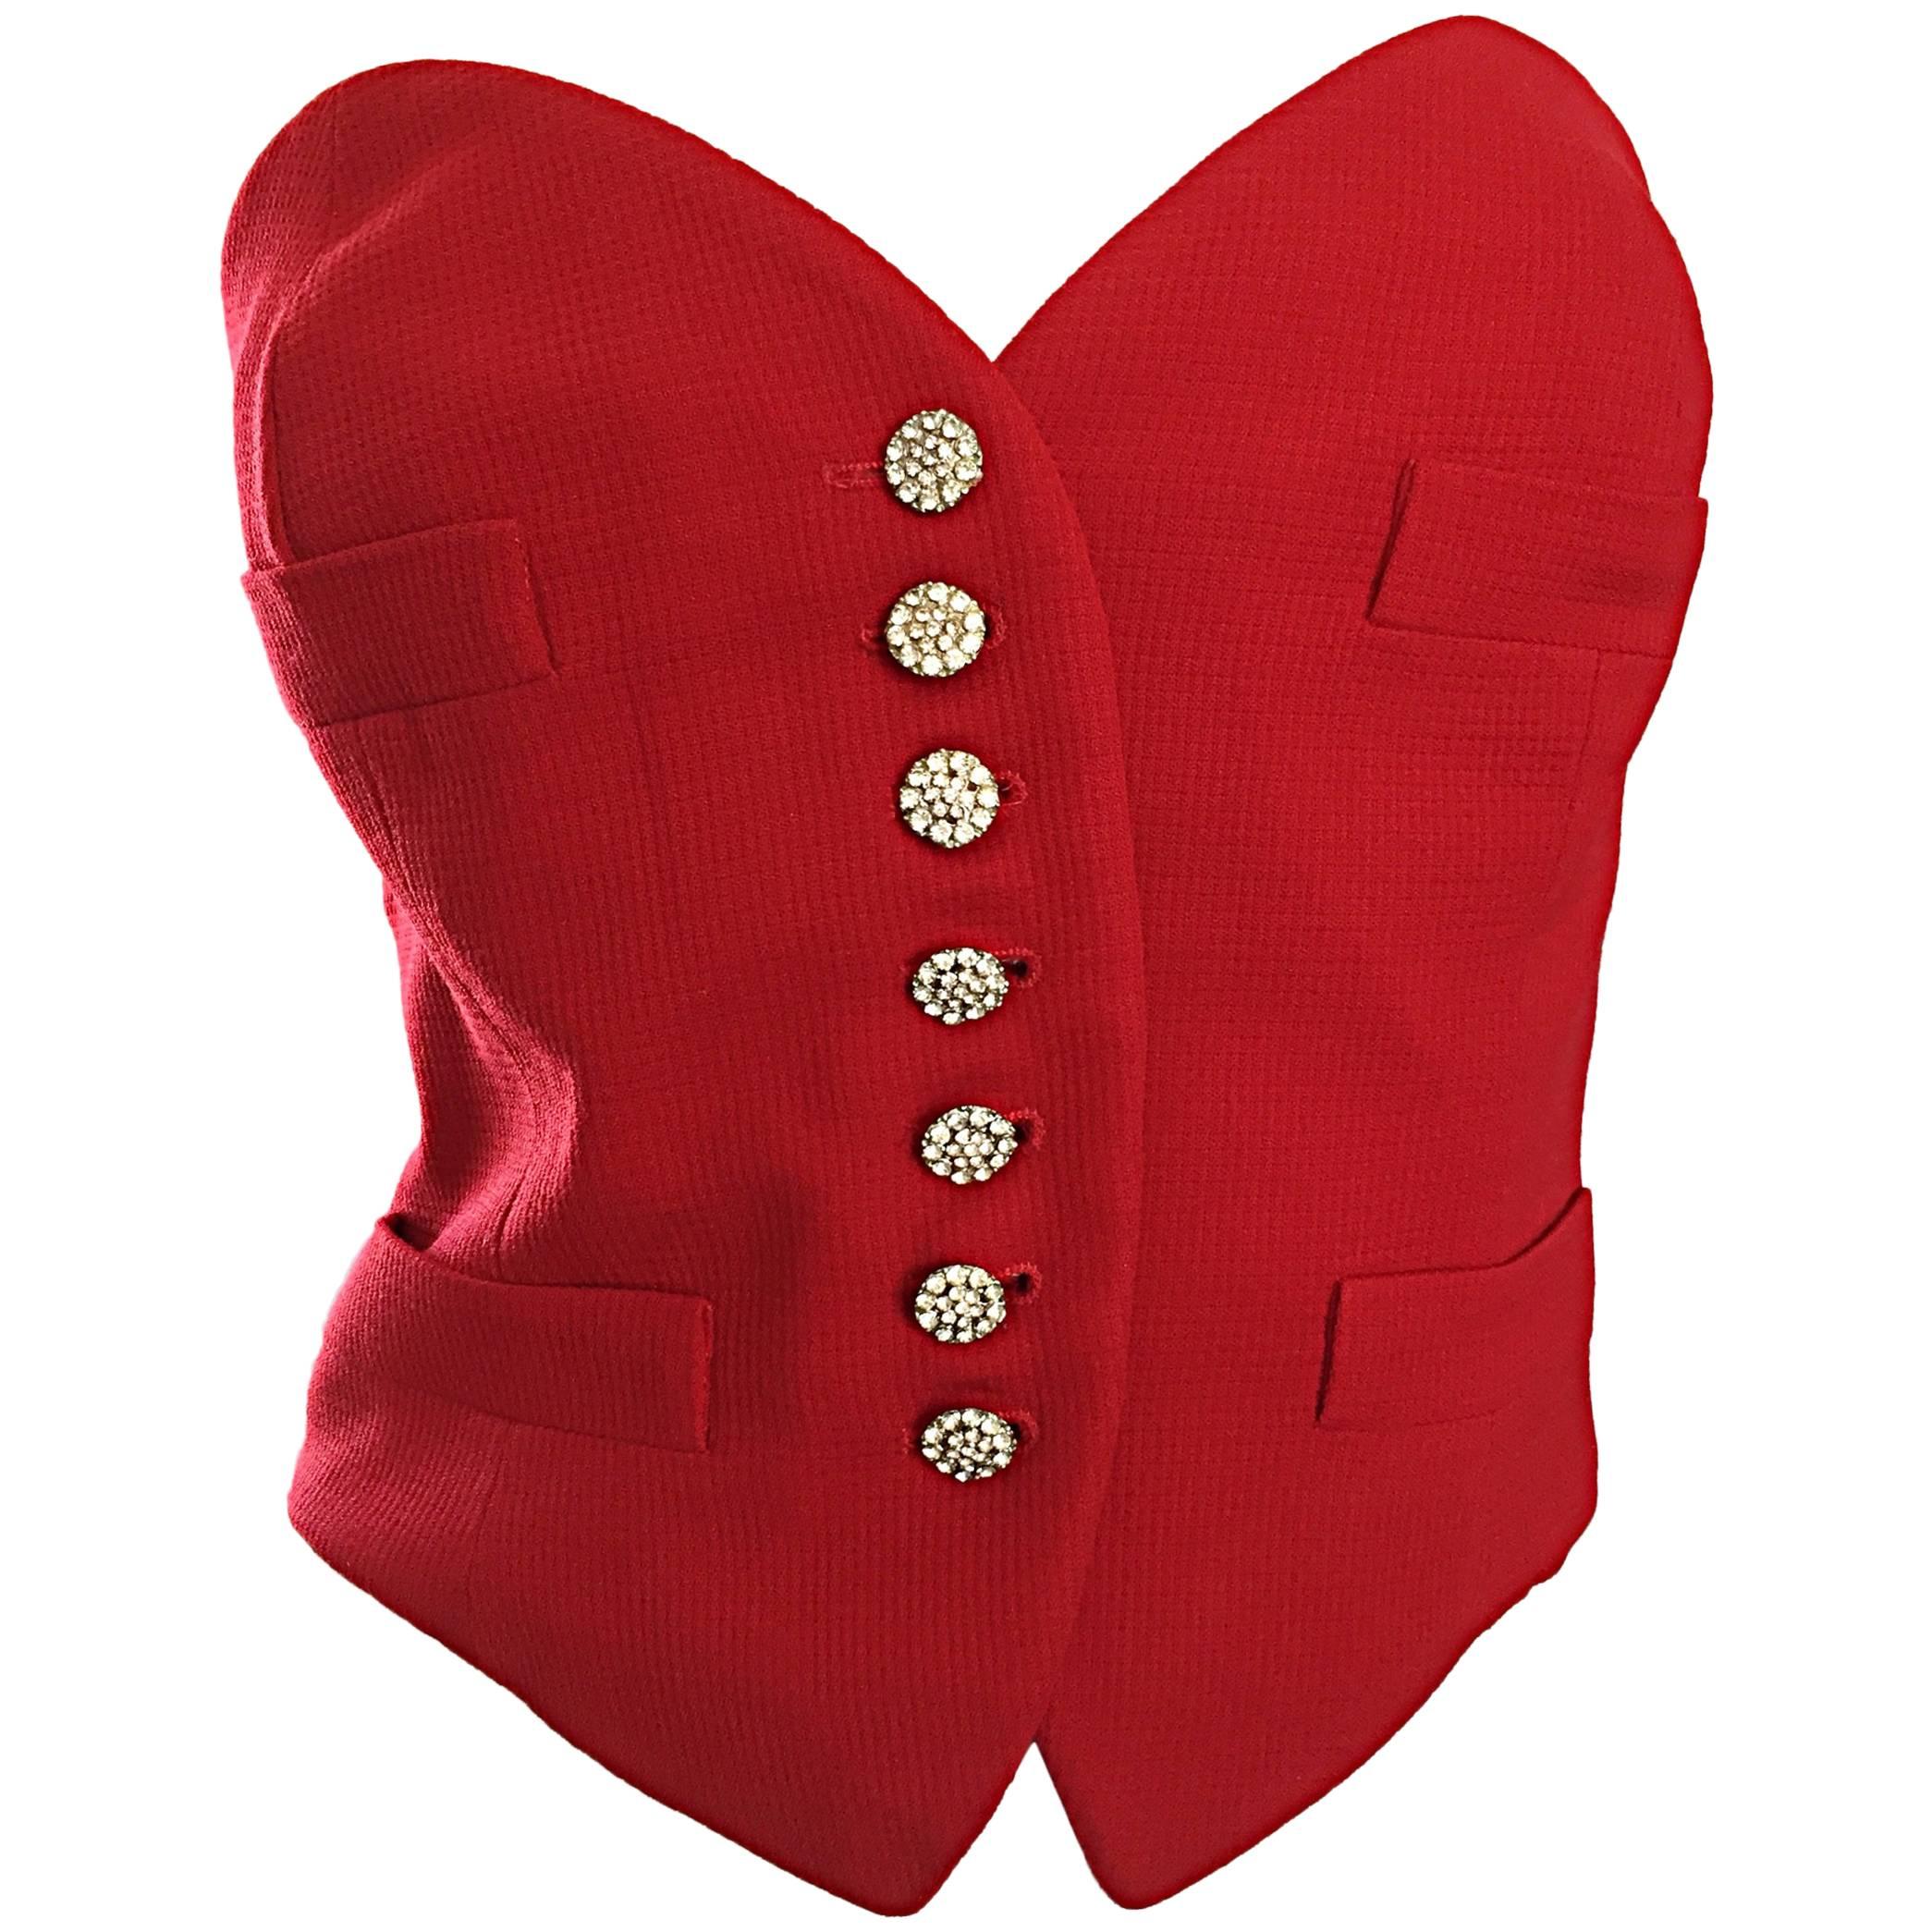 Rare Vintage Moschino Couture Red ' Heart ' Bustier Top w/ Rhinestone Buttons